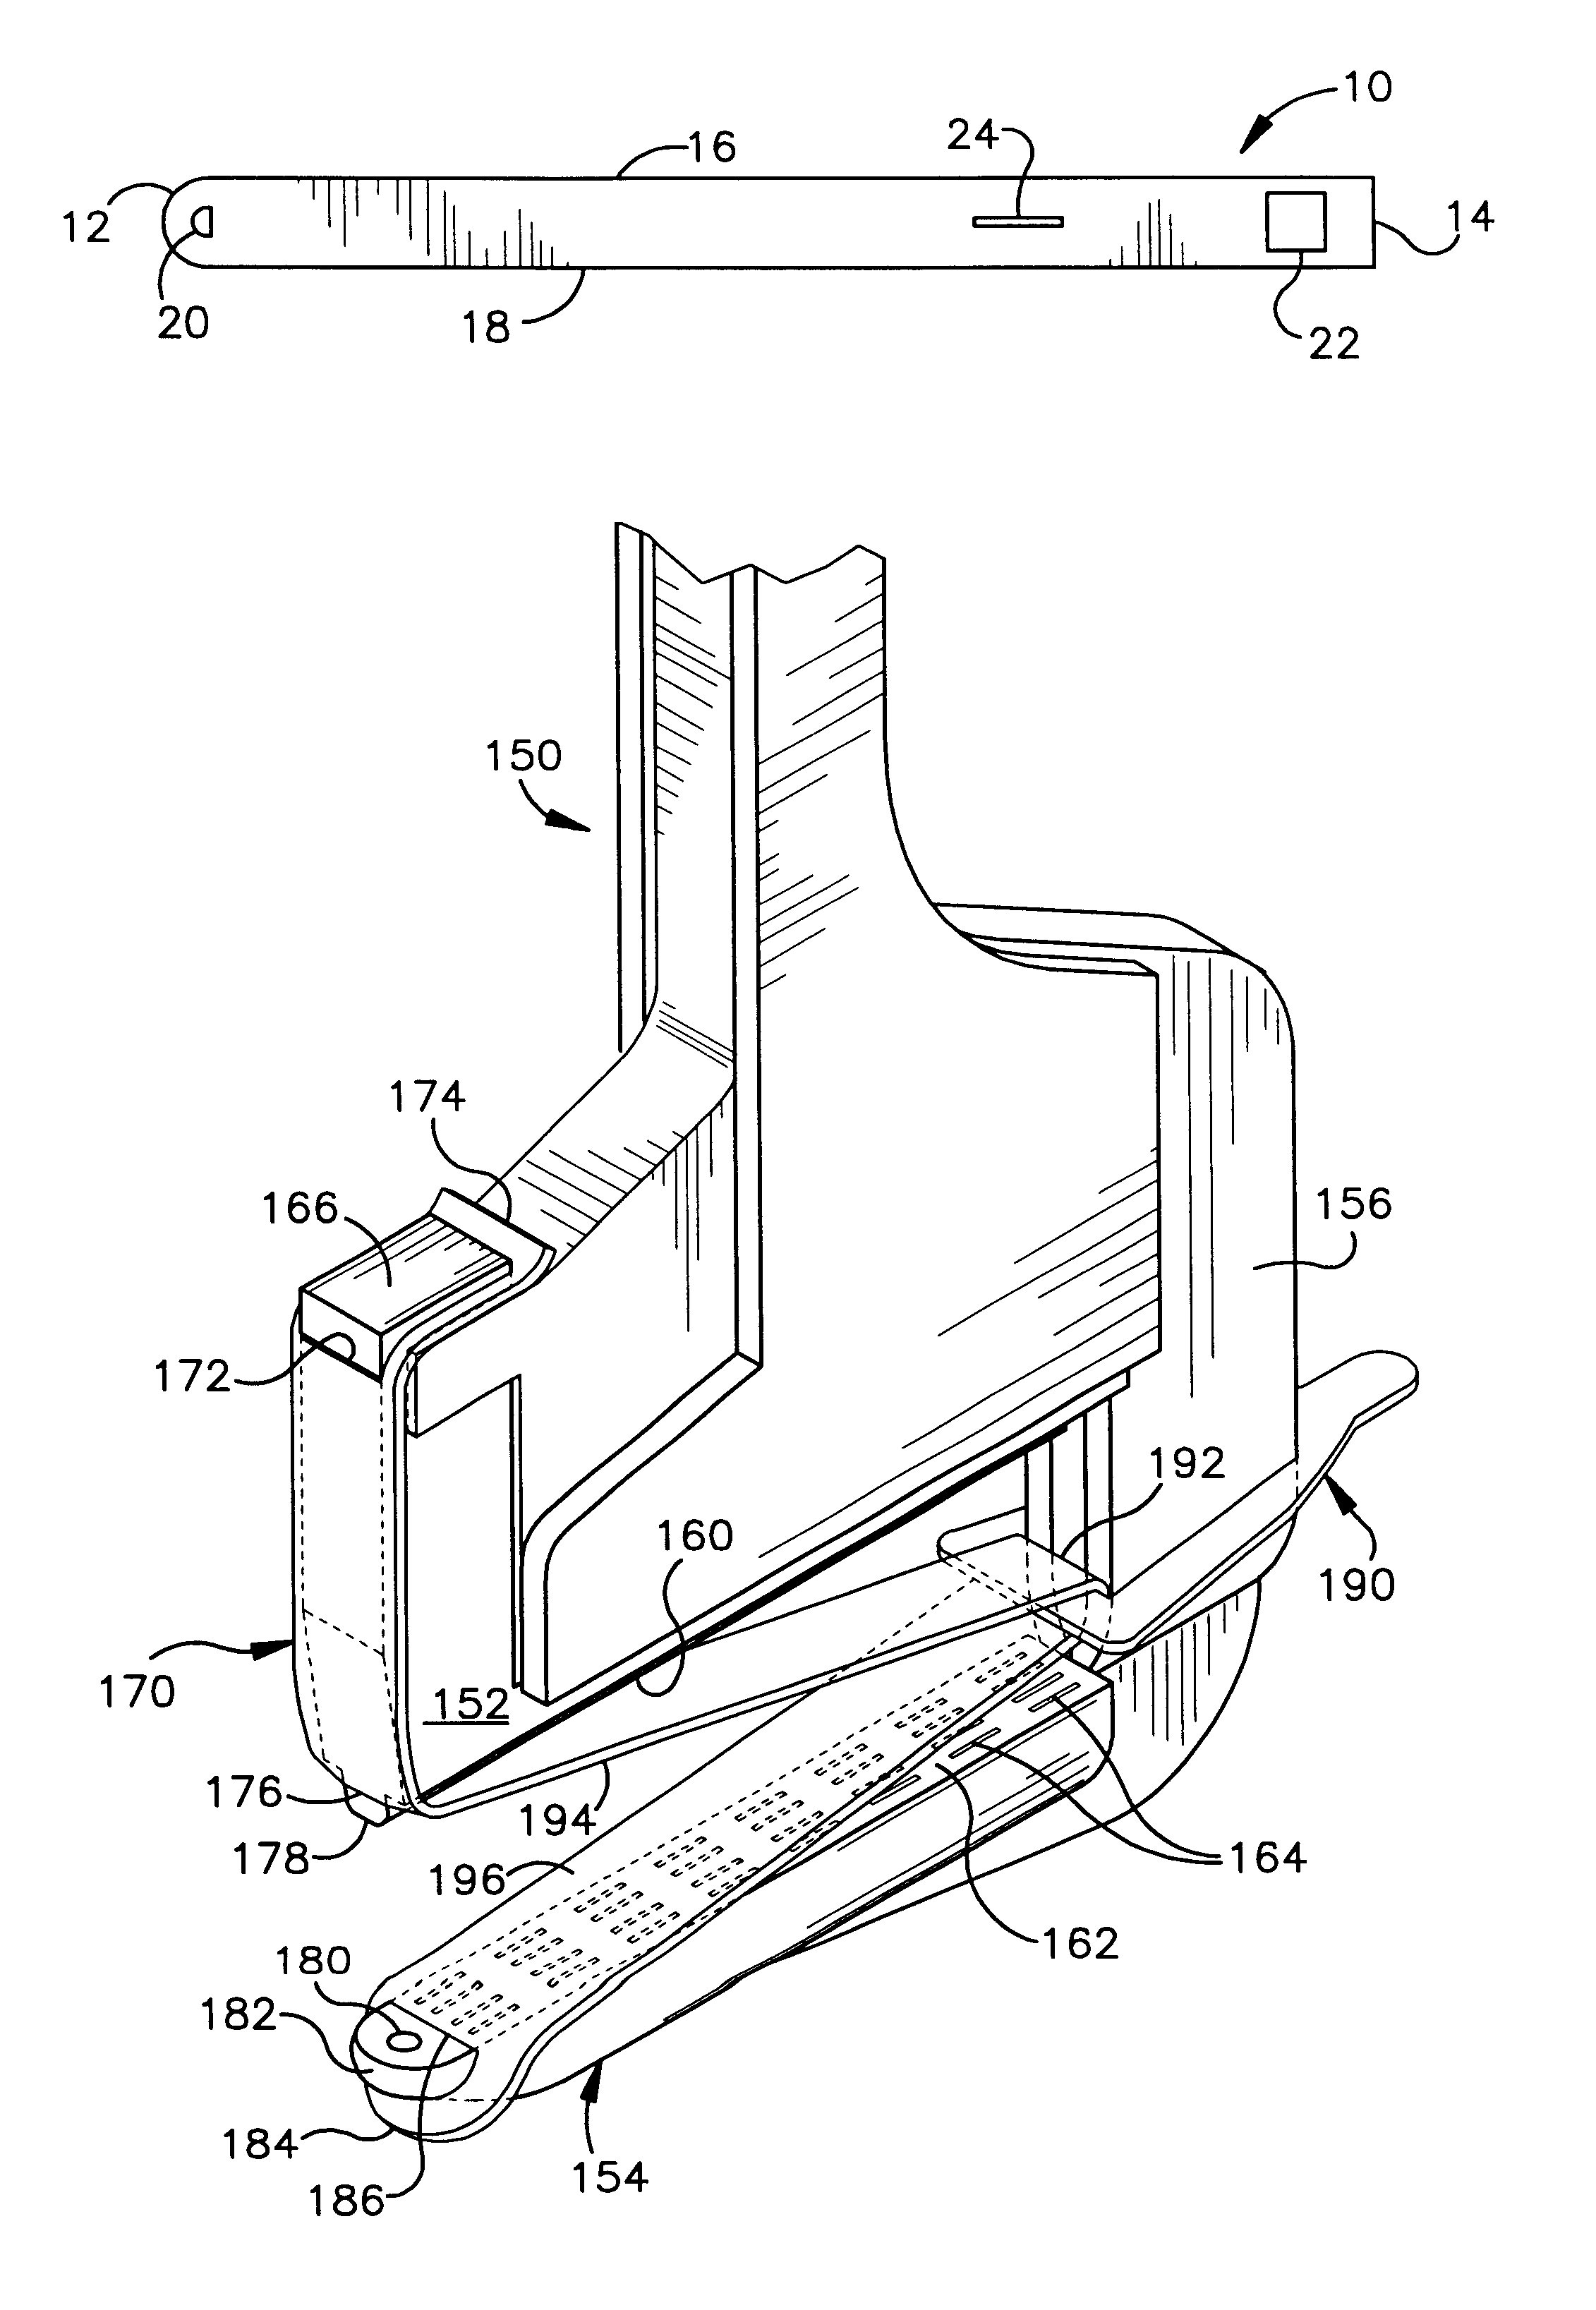 Biological tissue strip and system and method to seal tissue